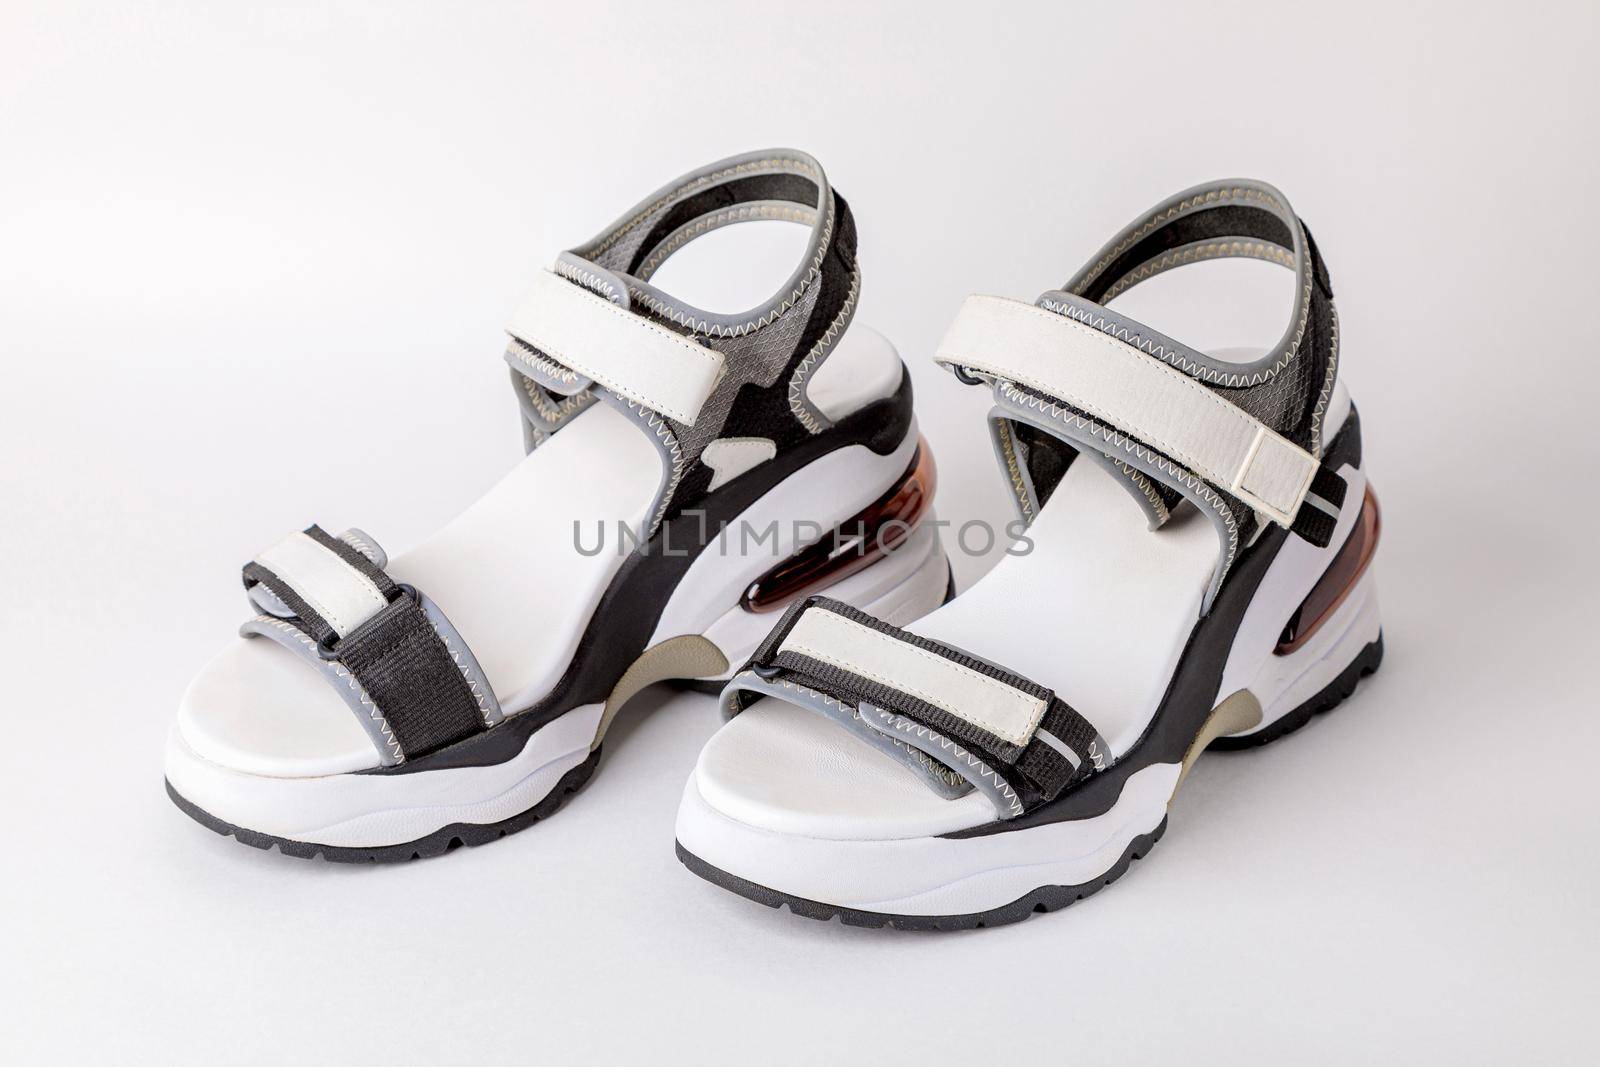 Women's, fashionable, sports sandals on a white background. by Yurich32